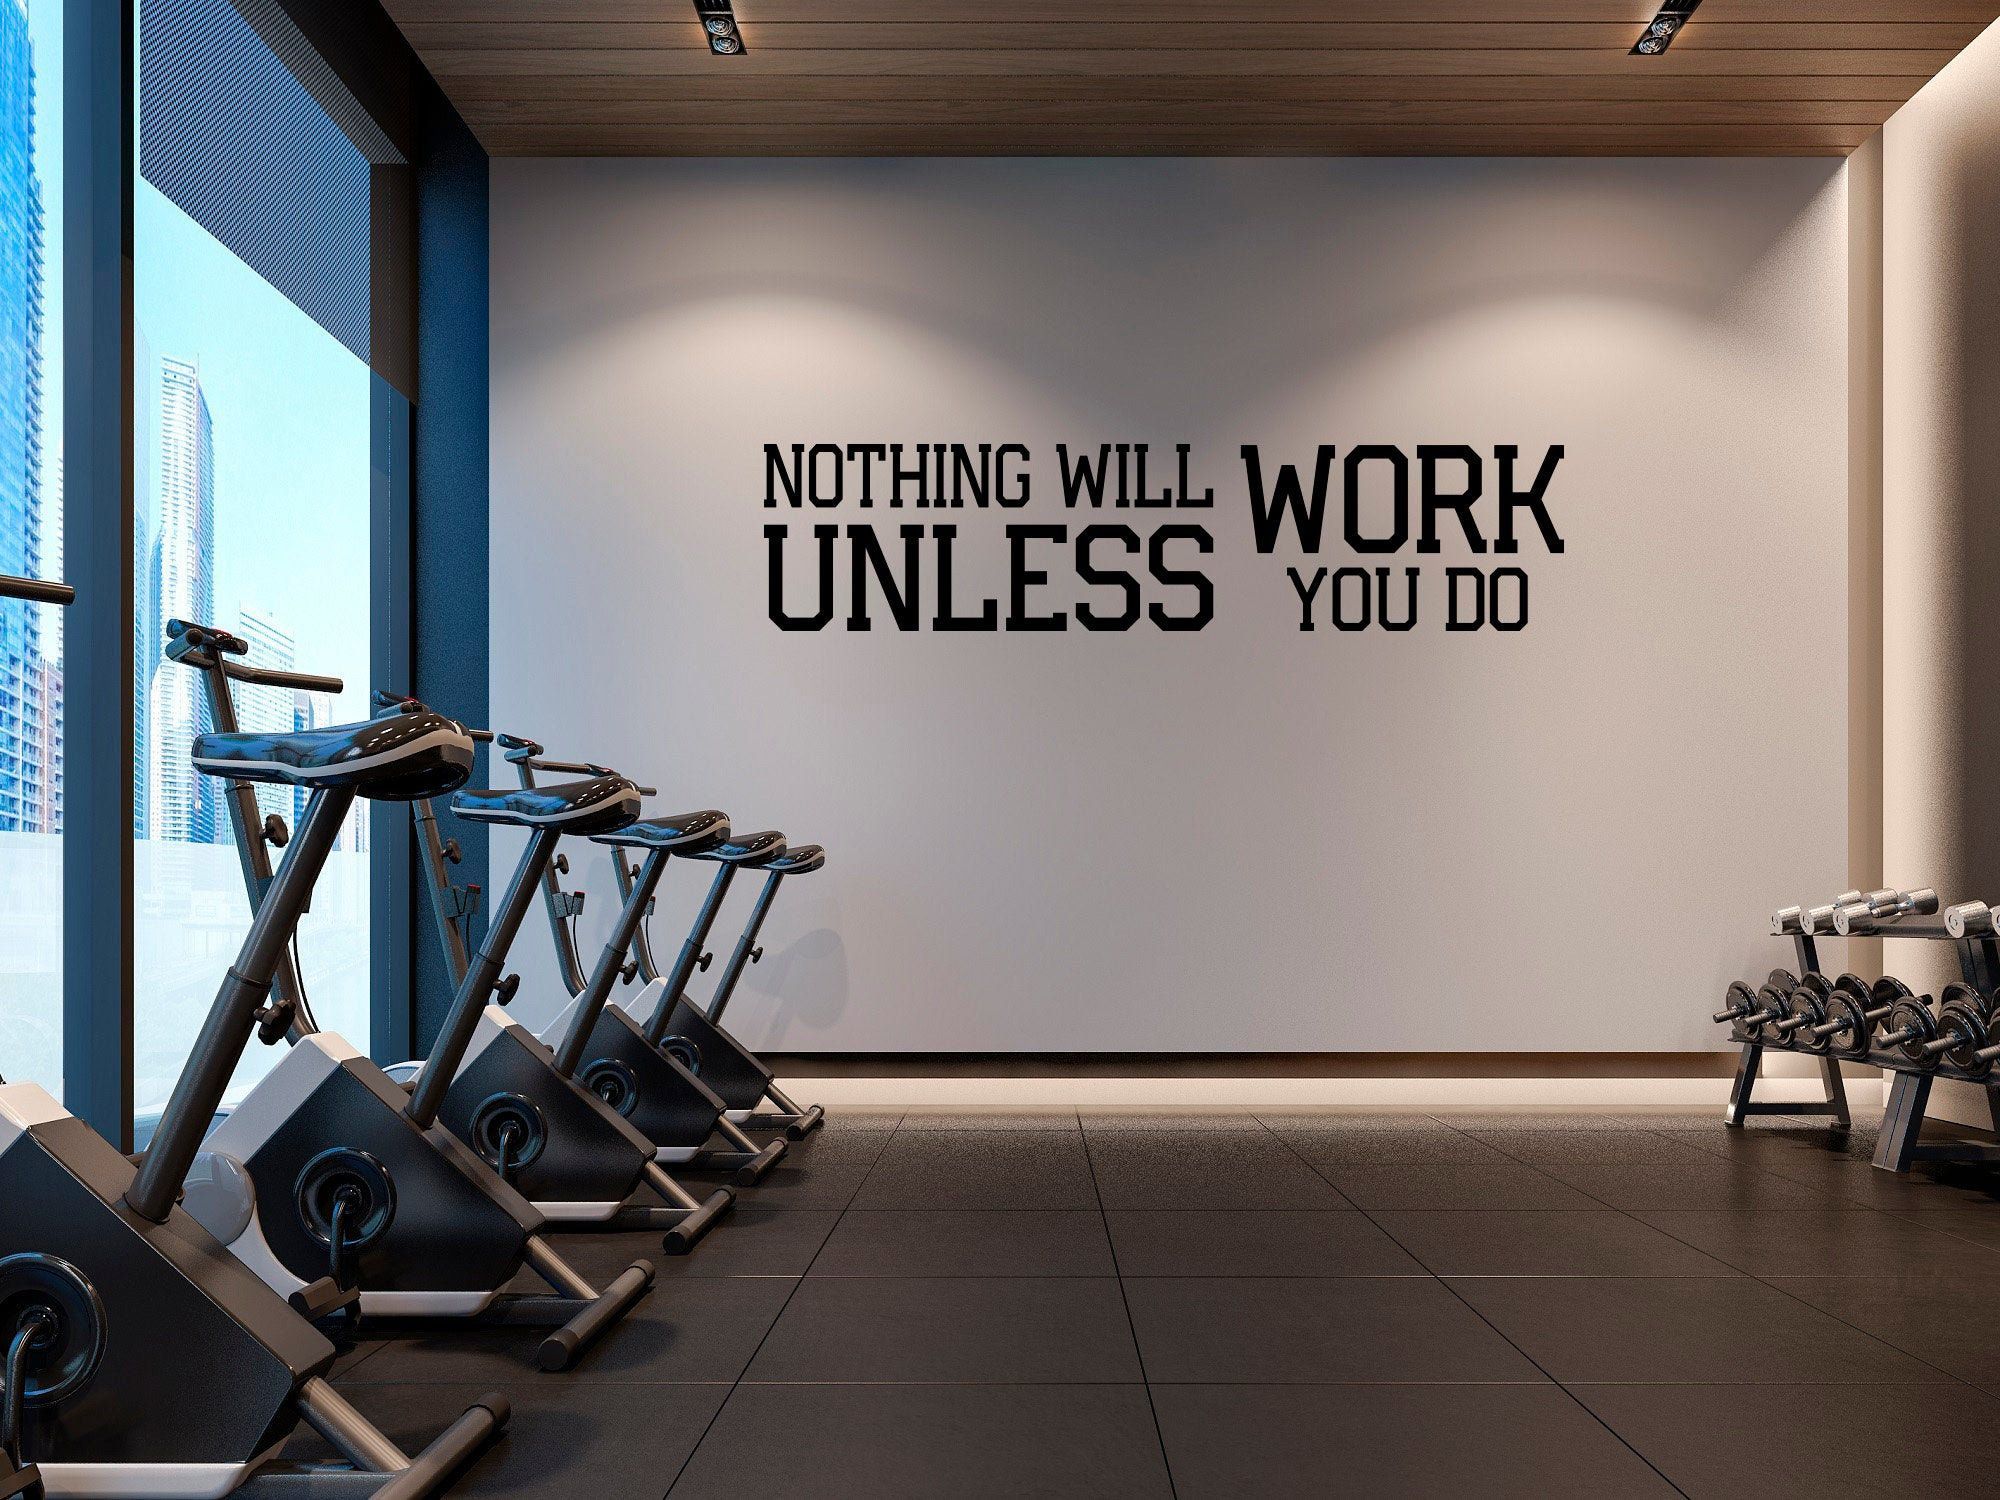 Inspirational Quotes Wall Decal Nothing Will Work Unless You Do Vinyl Stickers Motivational Quotes Sport Fitness Wall Decal, Gym Decor SB157 - Inspirational Quotes Wall Decal Nothing Will Work Unless You Do Vinyl Stickers Motivational Quotes Sport Fitness Wall Decal, Gym Decor SB157 -   18 fitness Room lounge ideas